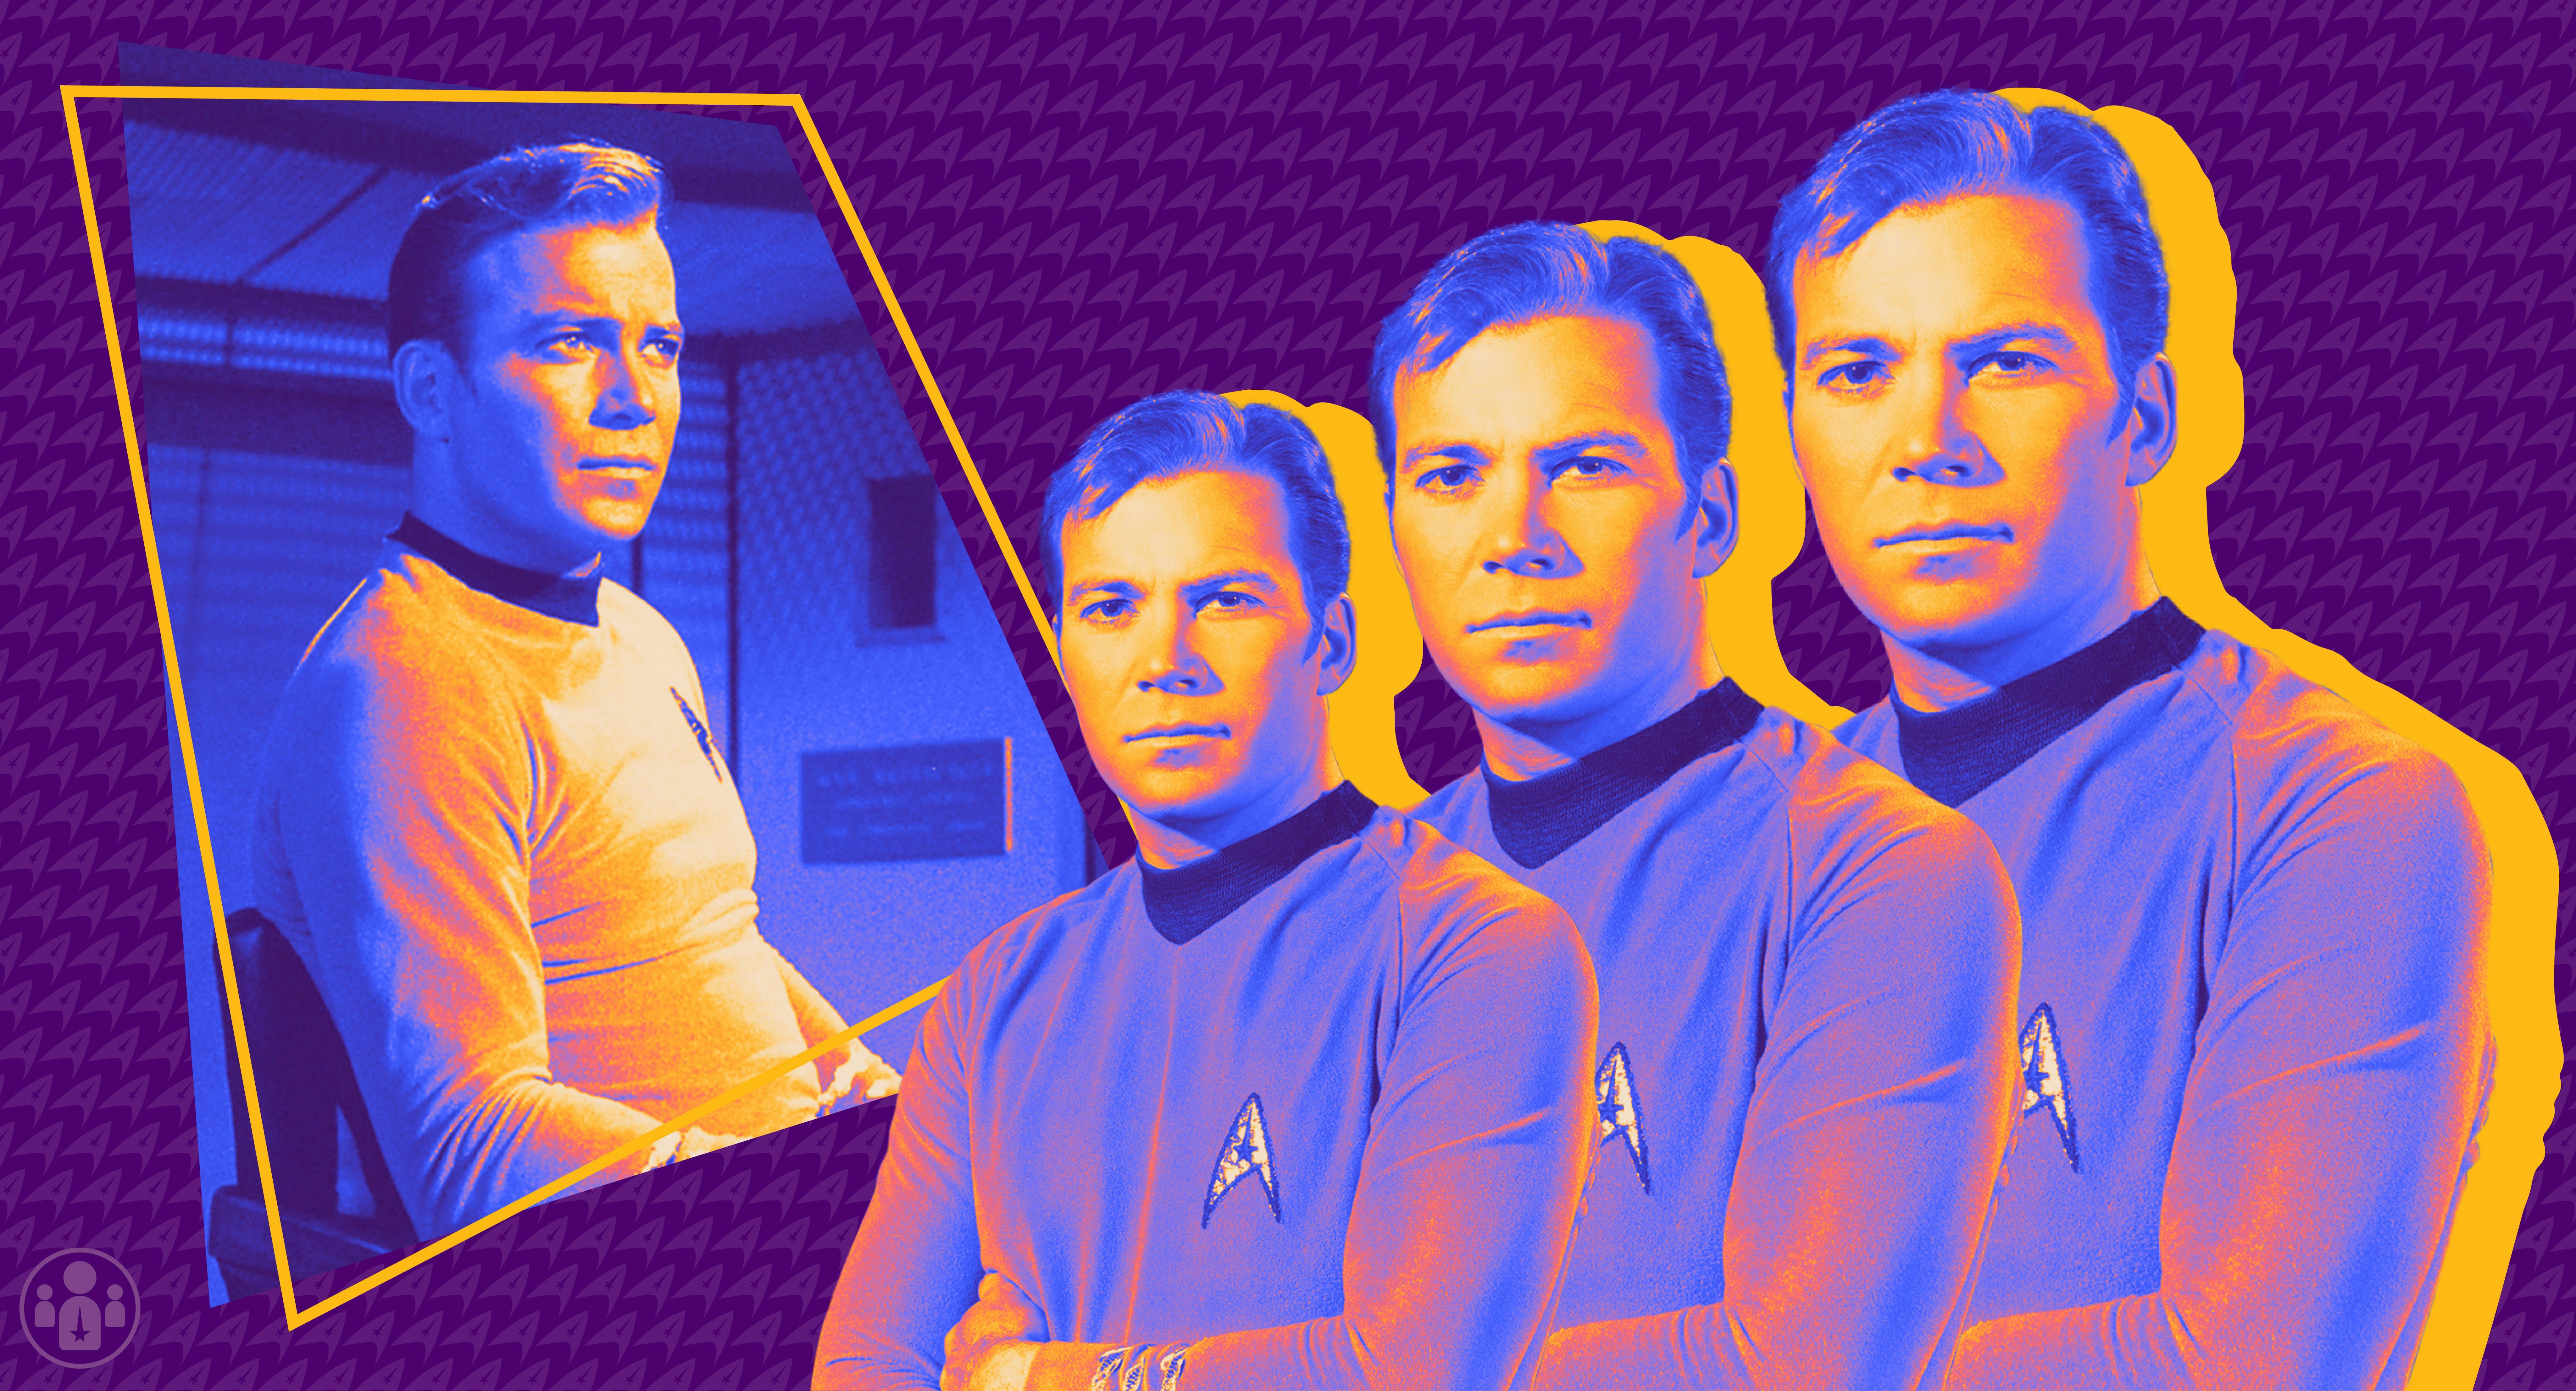 Two photos of Captain Kirk (The Original Series). One is of him on the bridge in his gold captain's uniform; the other is a cut out of him repeated three times. The images are purple and yellow.